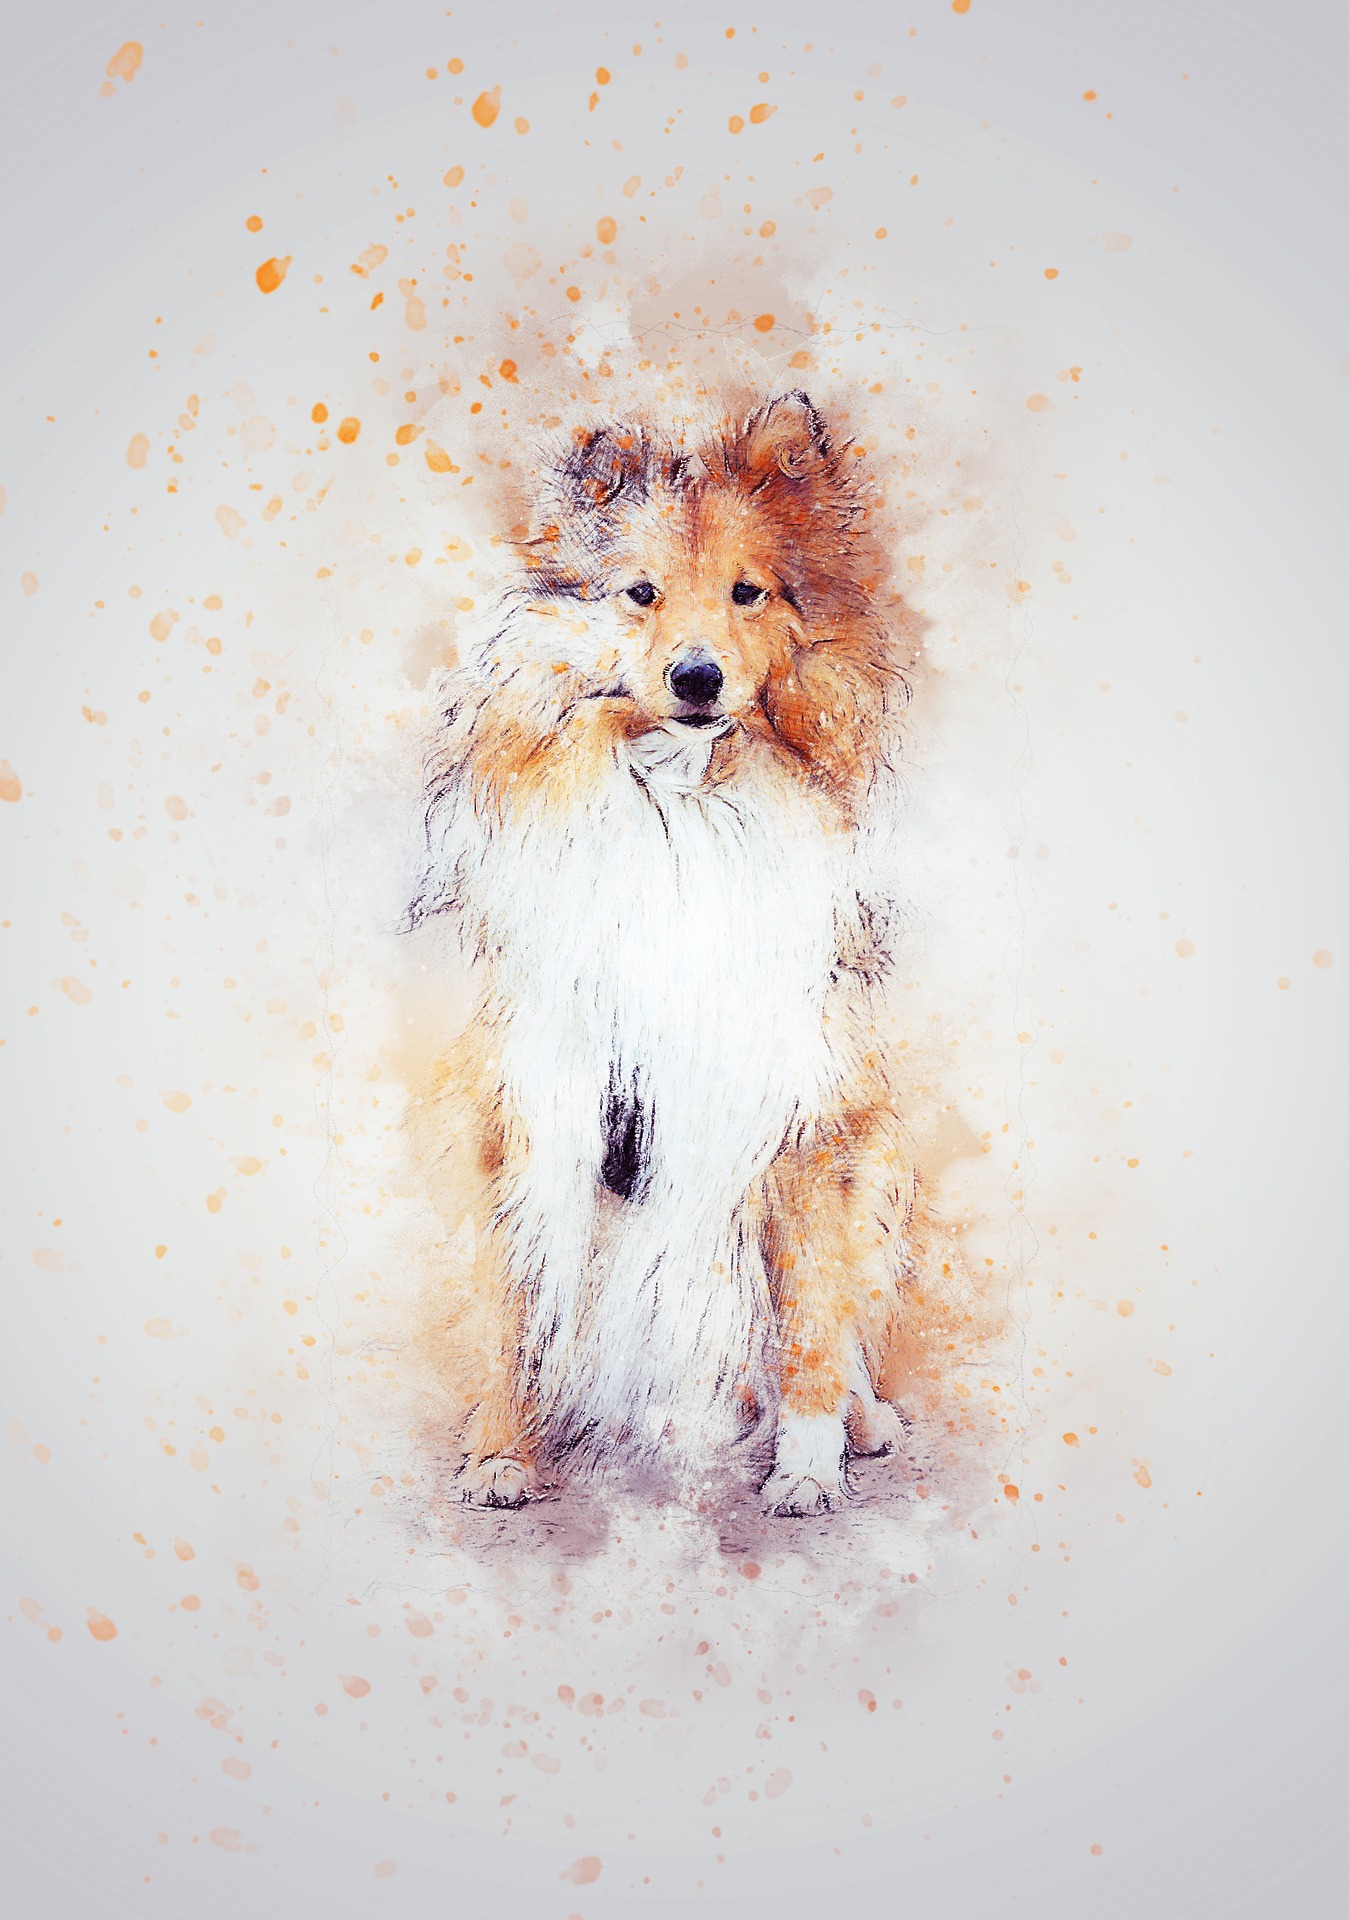 Shetland Sheepdog, also known as the Sheltie